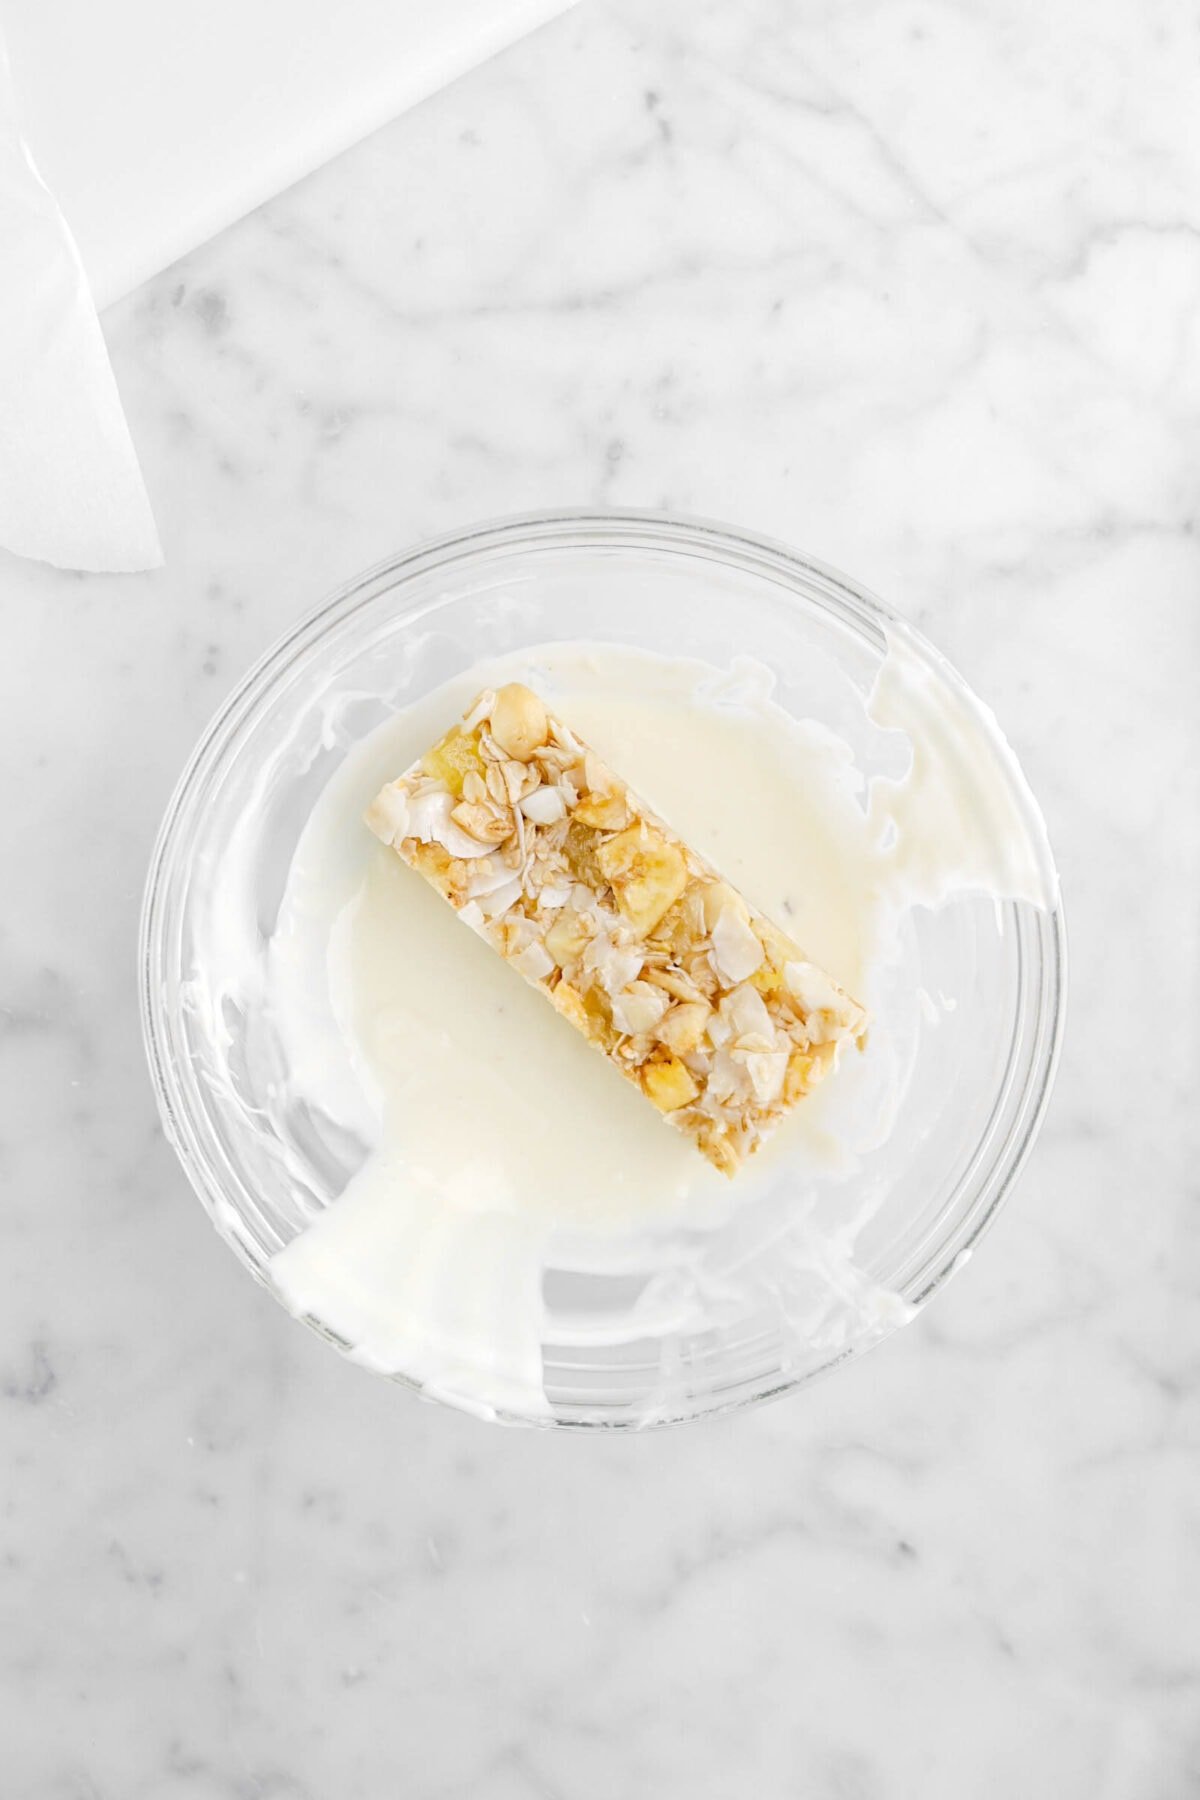 granola bar in bowl of melted white chocolate